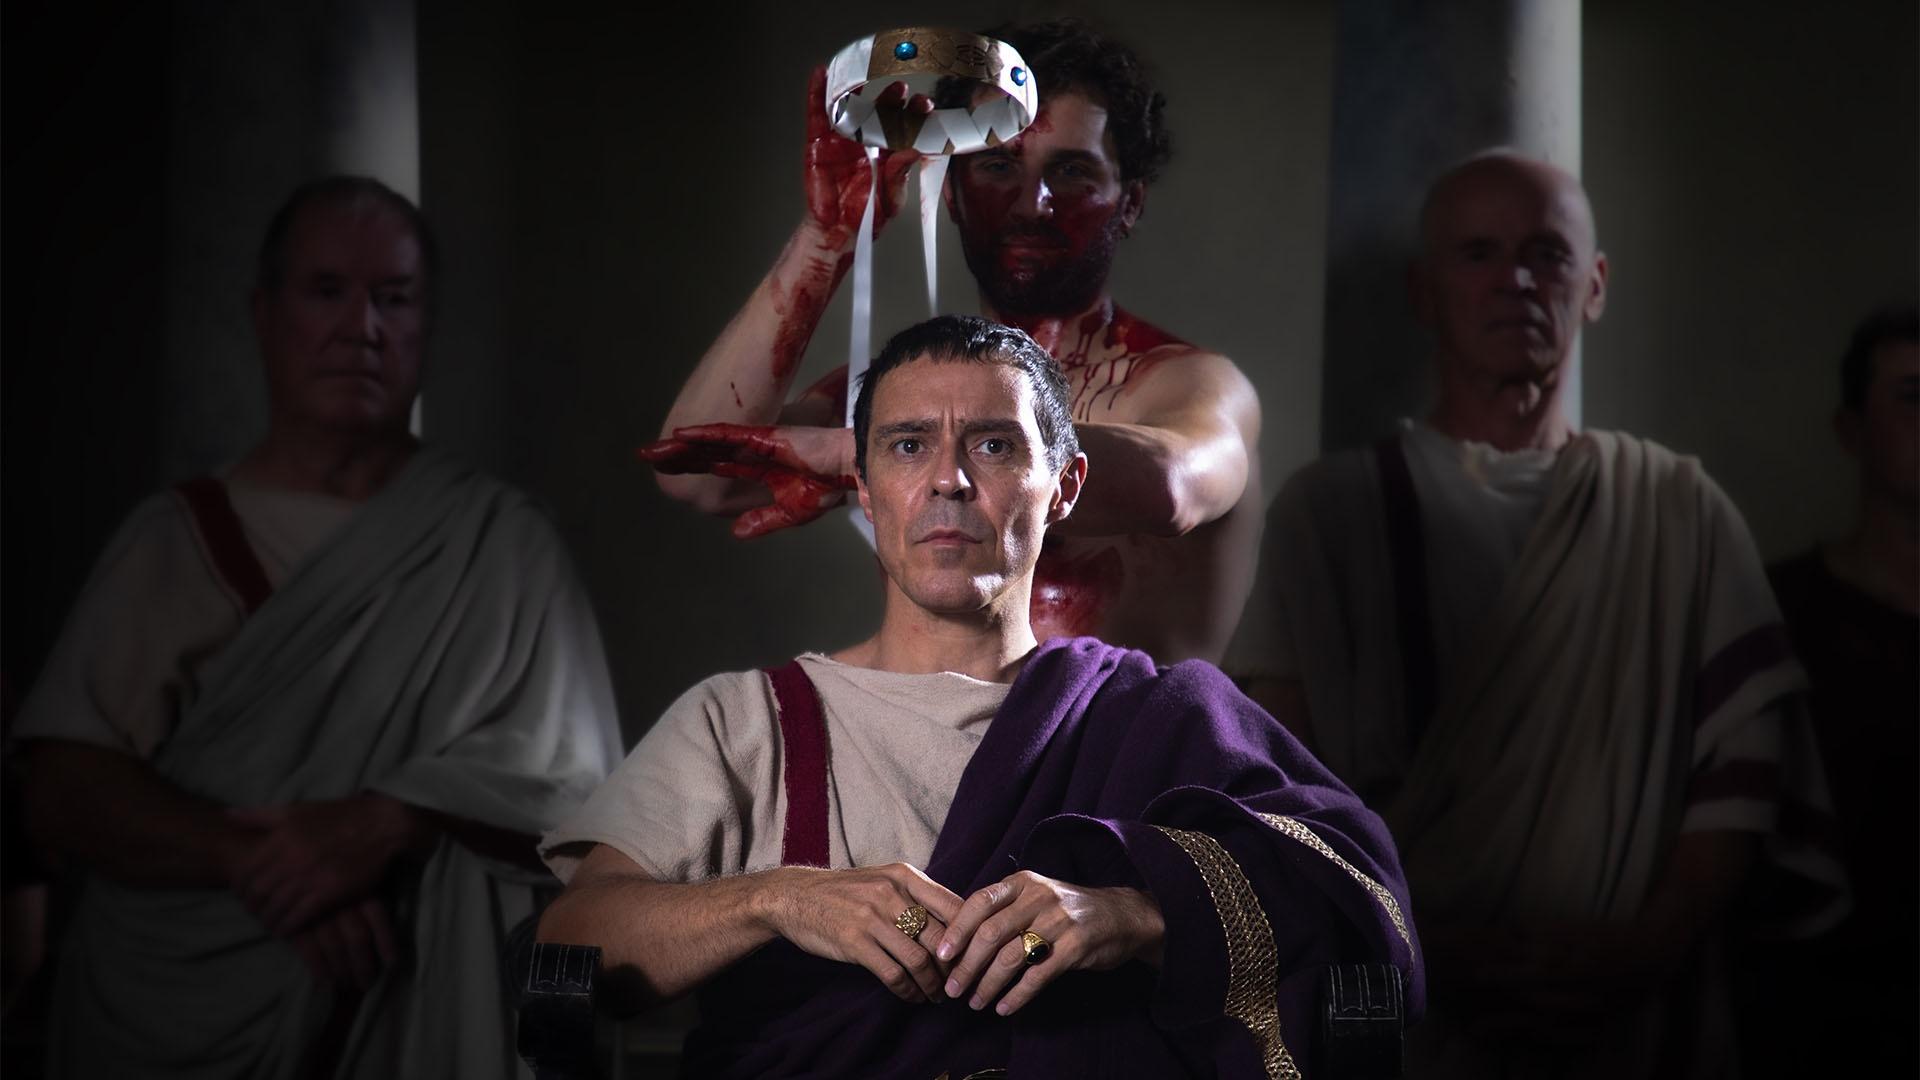 Julius Caesar: The Making of a Dictator: Ides of March